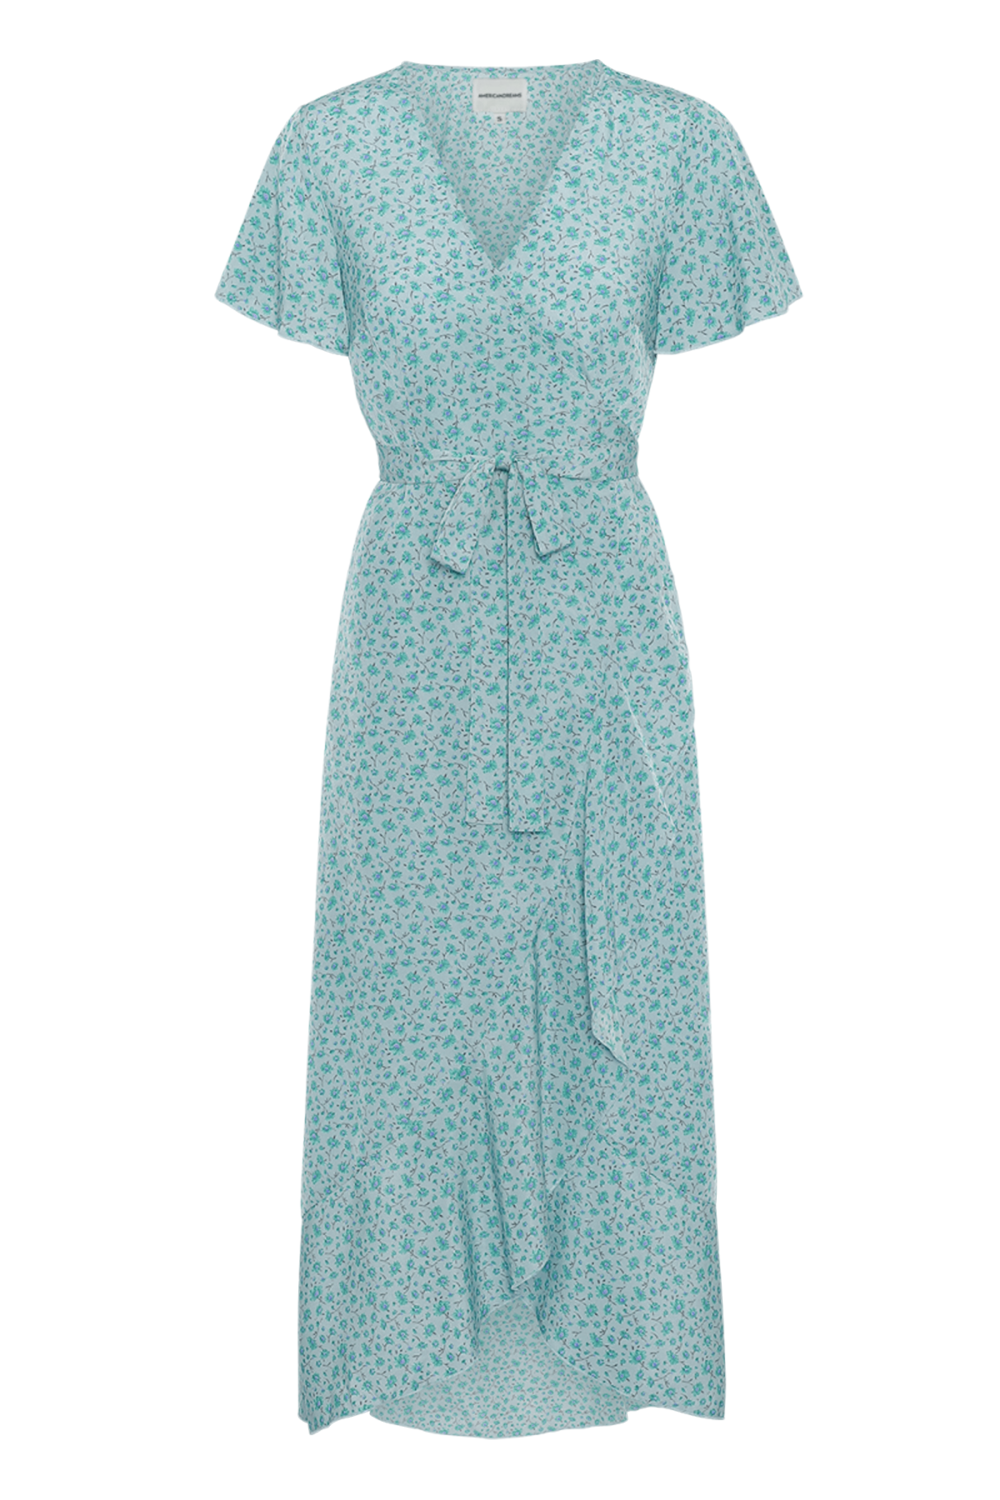 Milly Wrap Dress Long Turquoise Flower